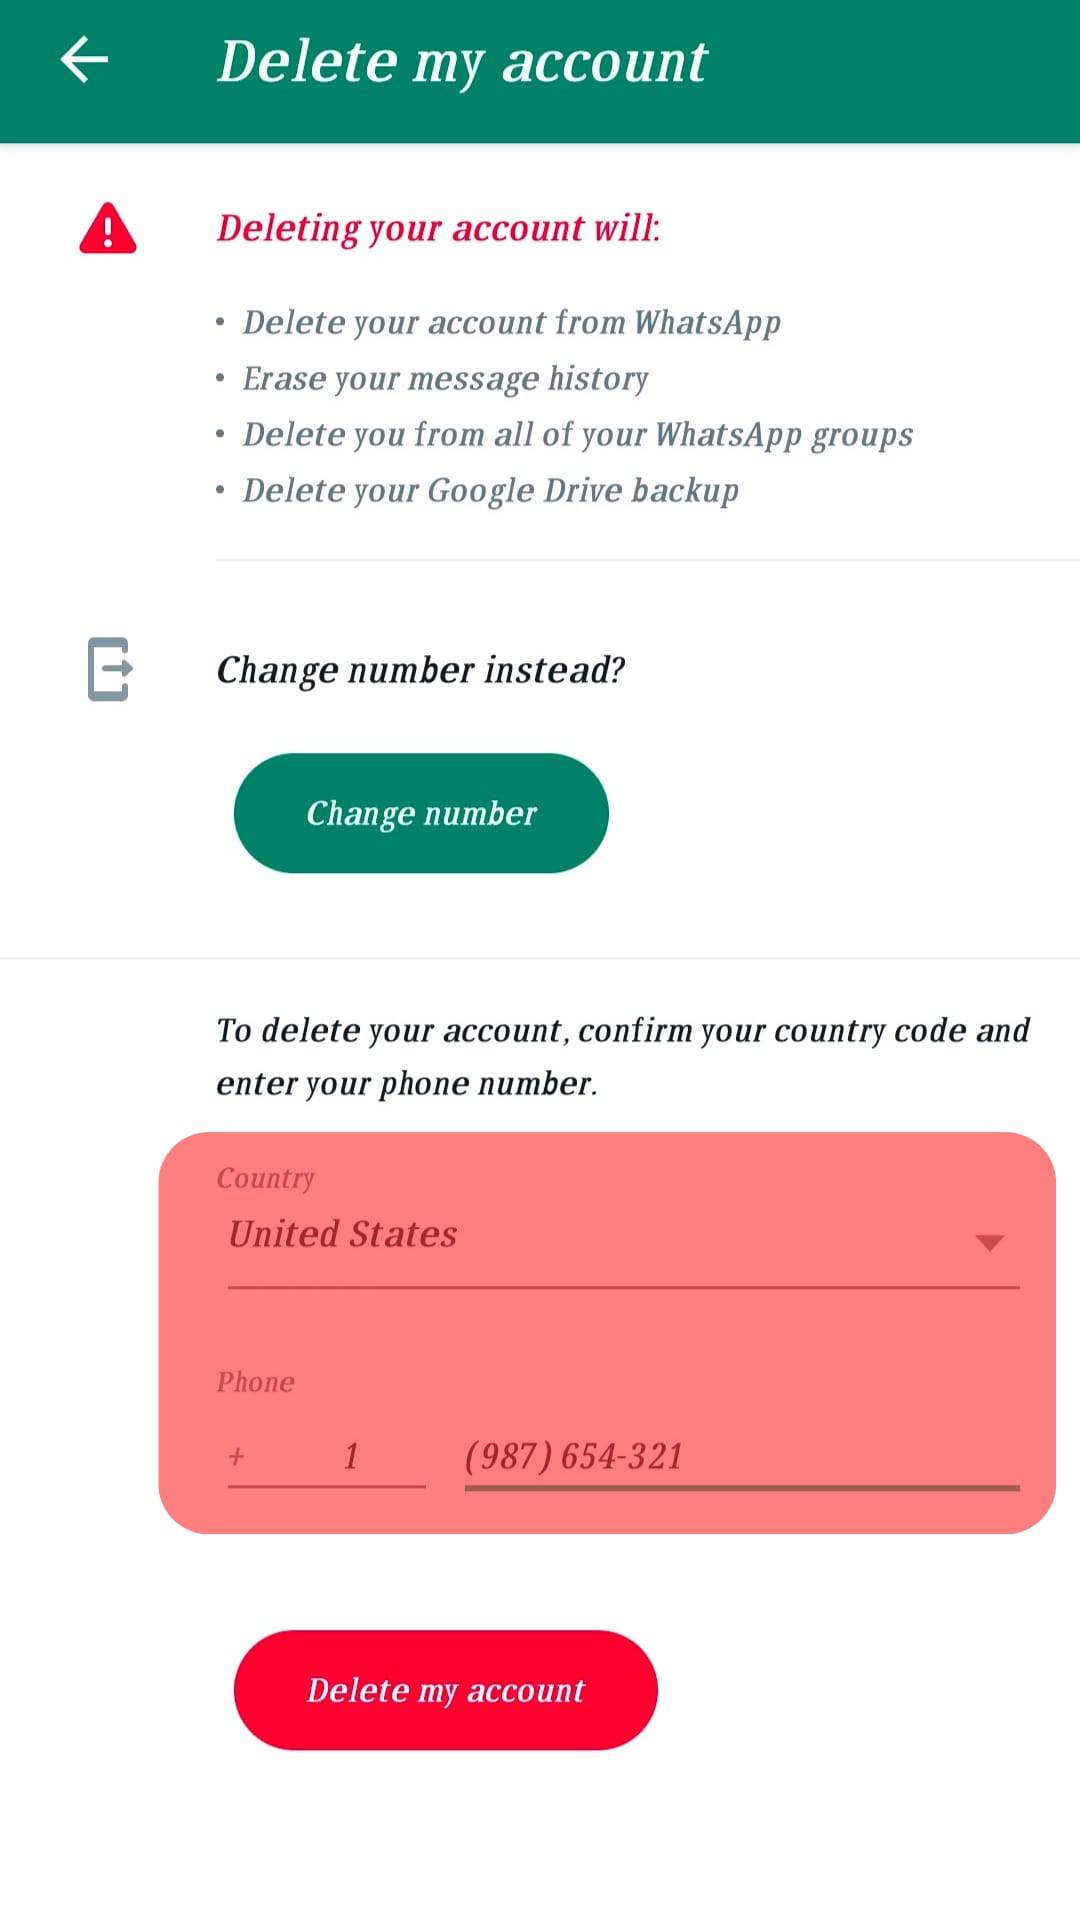 Enter Your Phone Number With Country Code